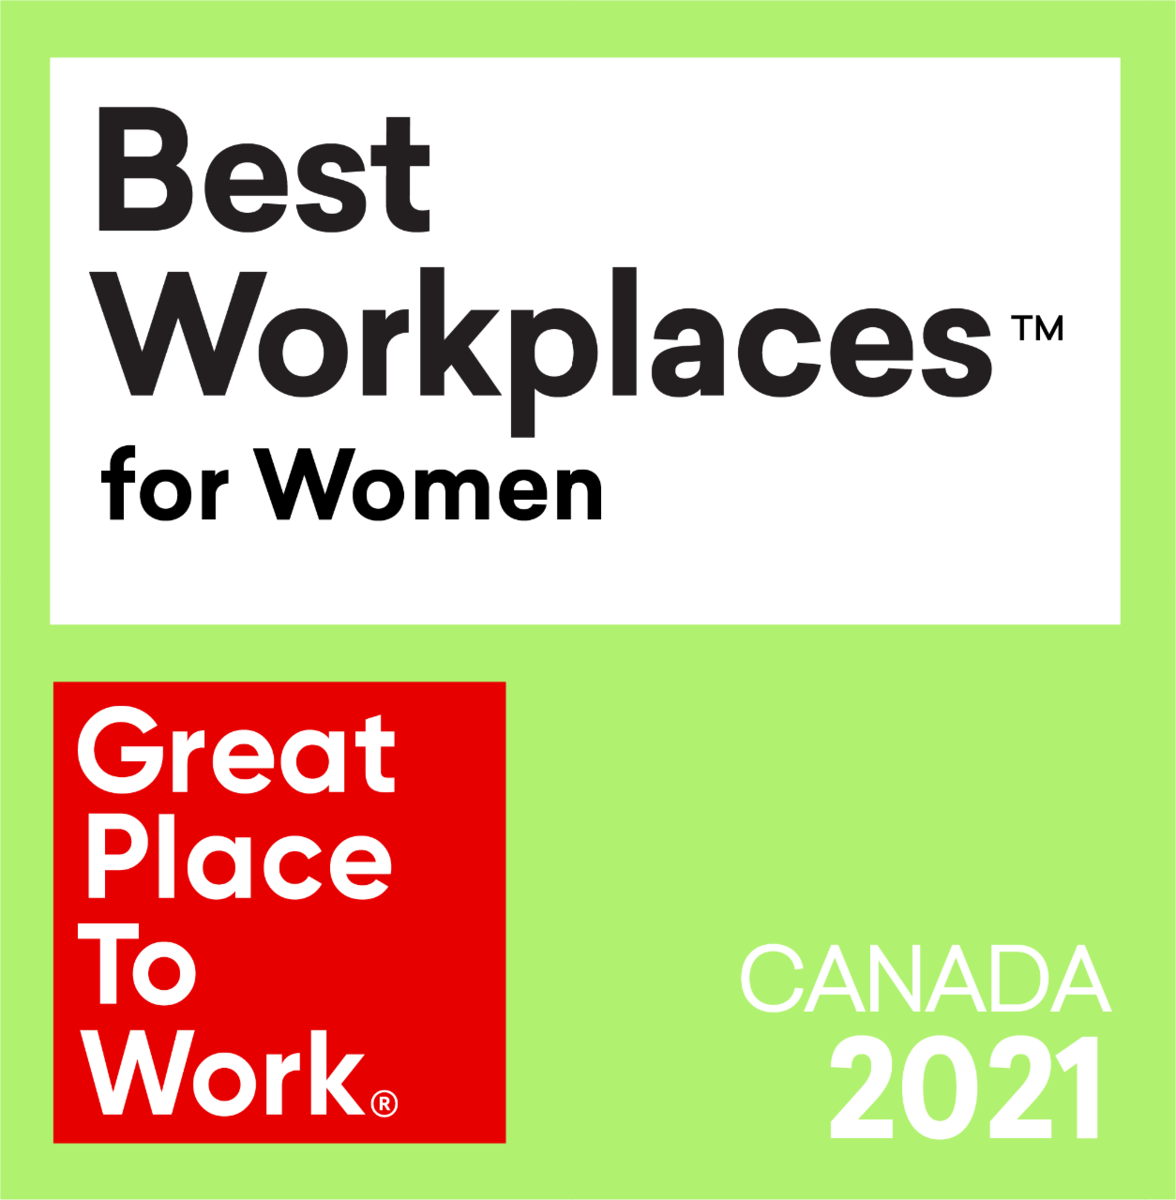 Best Workplaces for Women logo